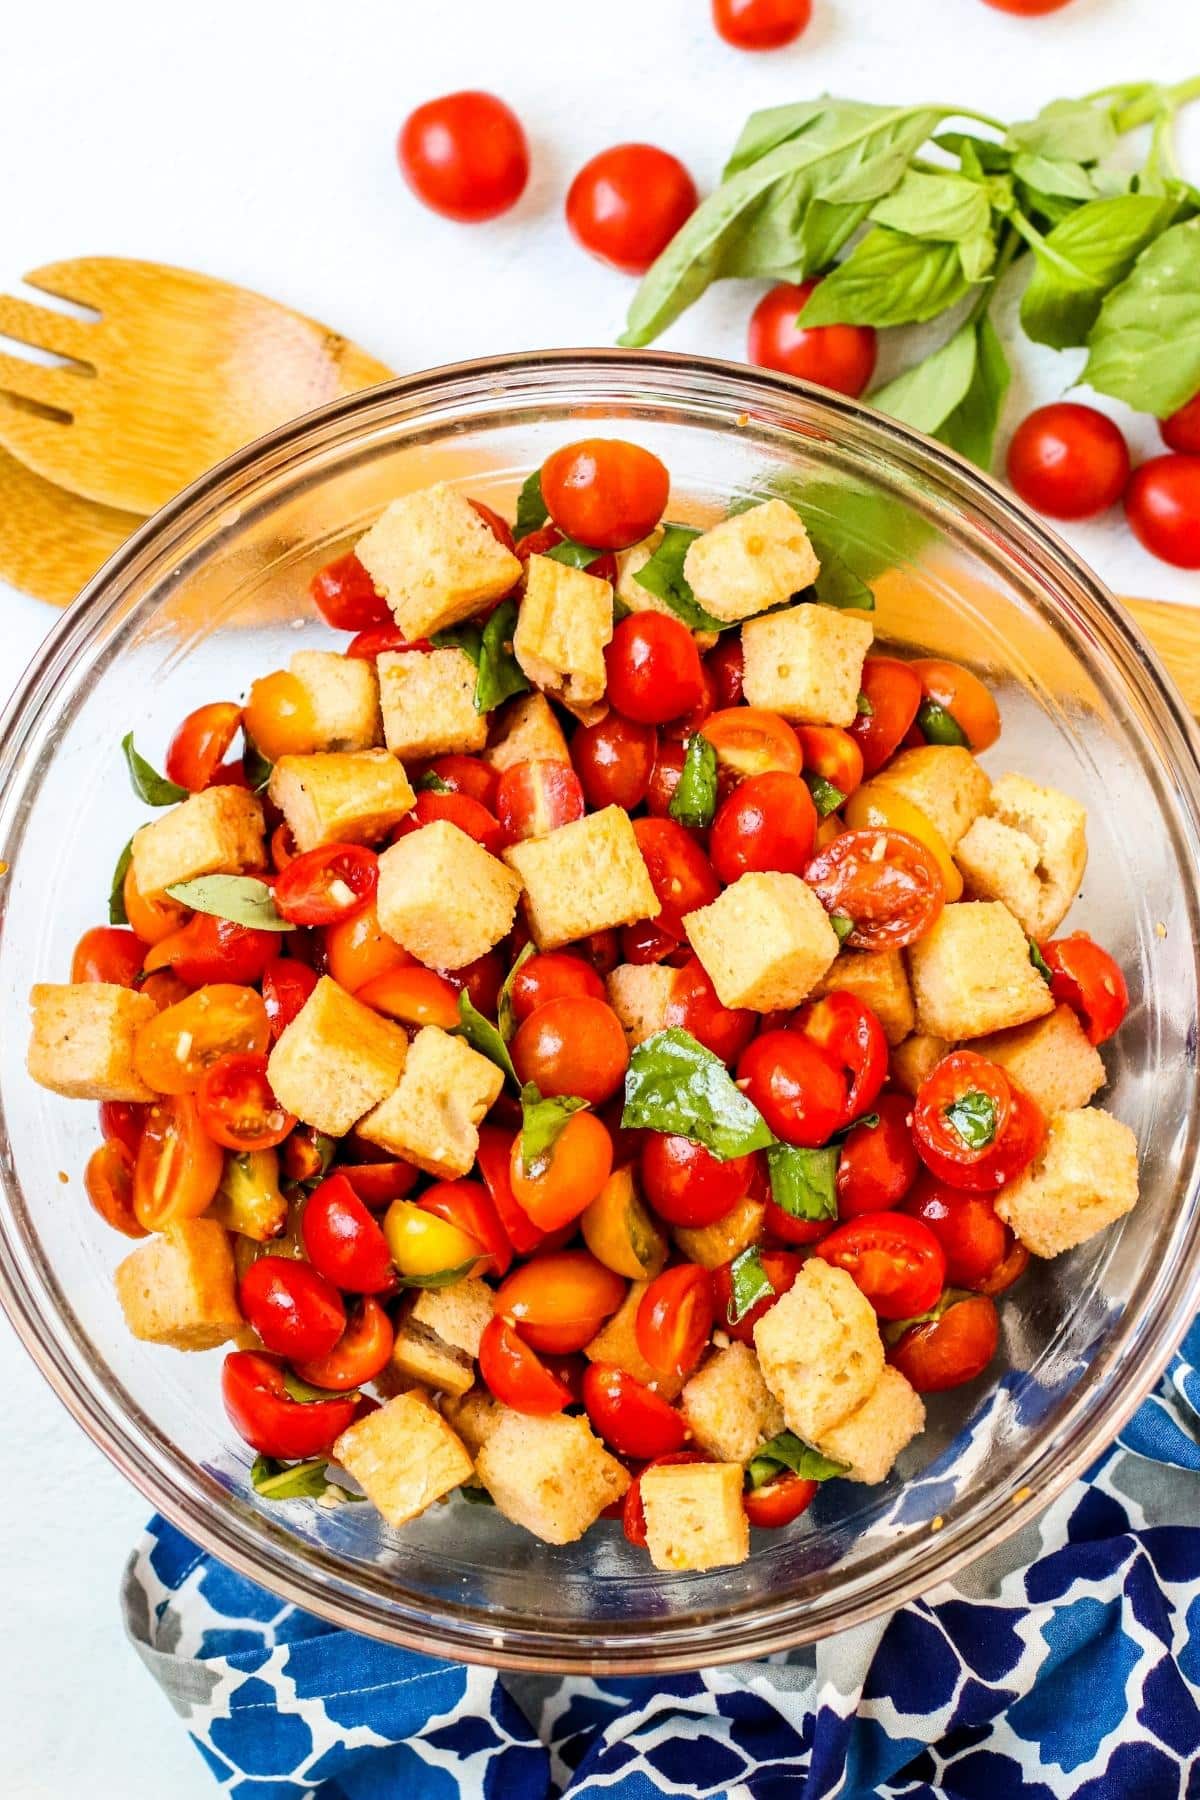 Bread Salad in a glass bowl surrounded by serving utensils, cherry tomatoes, fresh basil, and a blue patterned napkin.